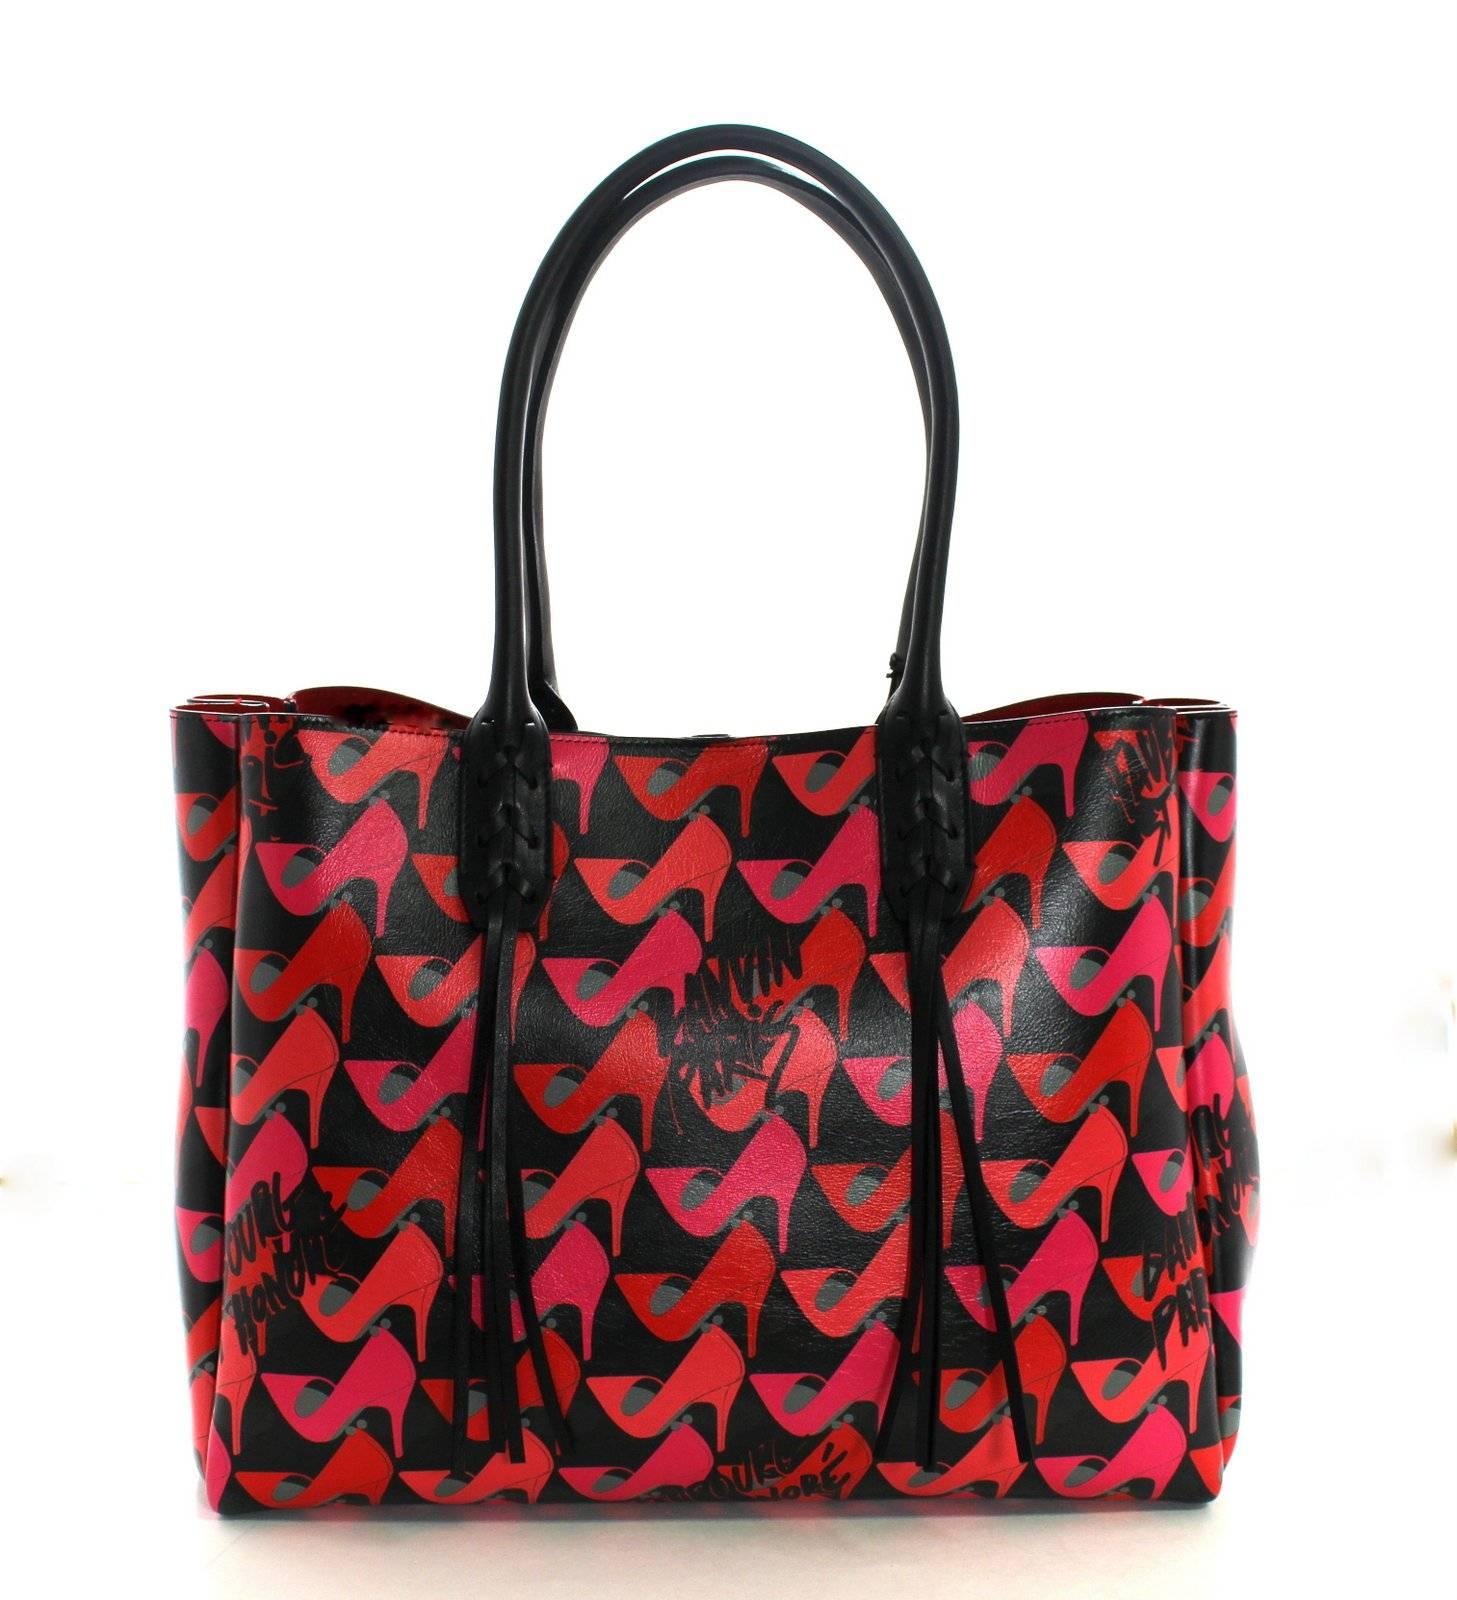 Lanvin Pink Shoe Print on Black Leather Tote Bag In New Condition For Sale In New York City & Hamptons, NY